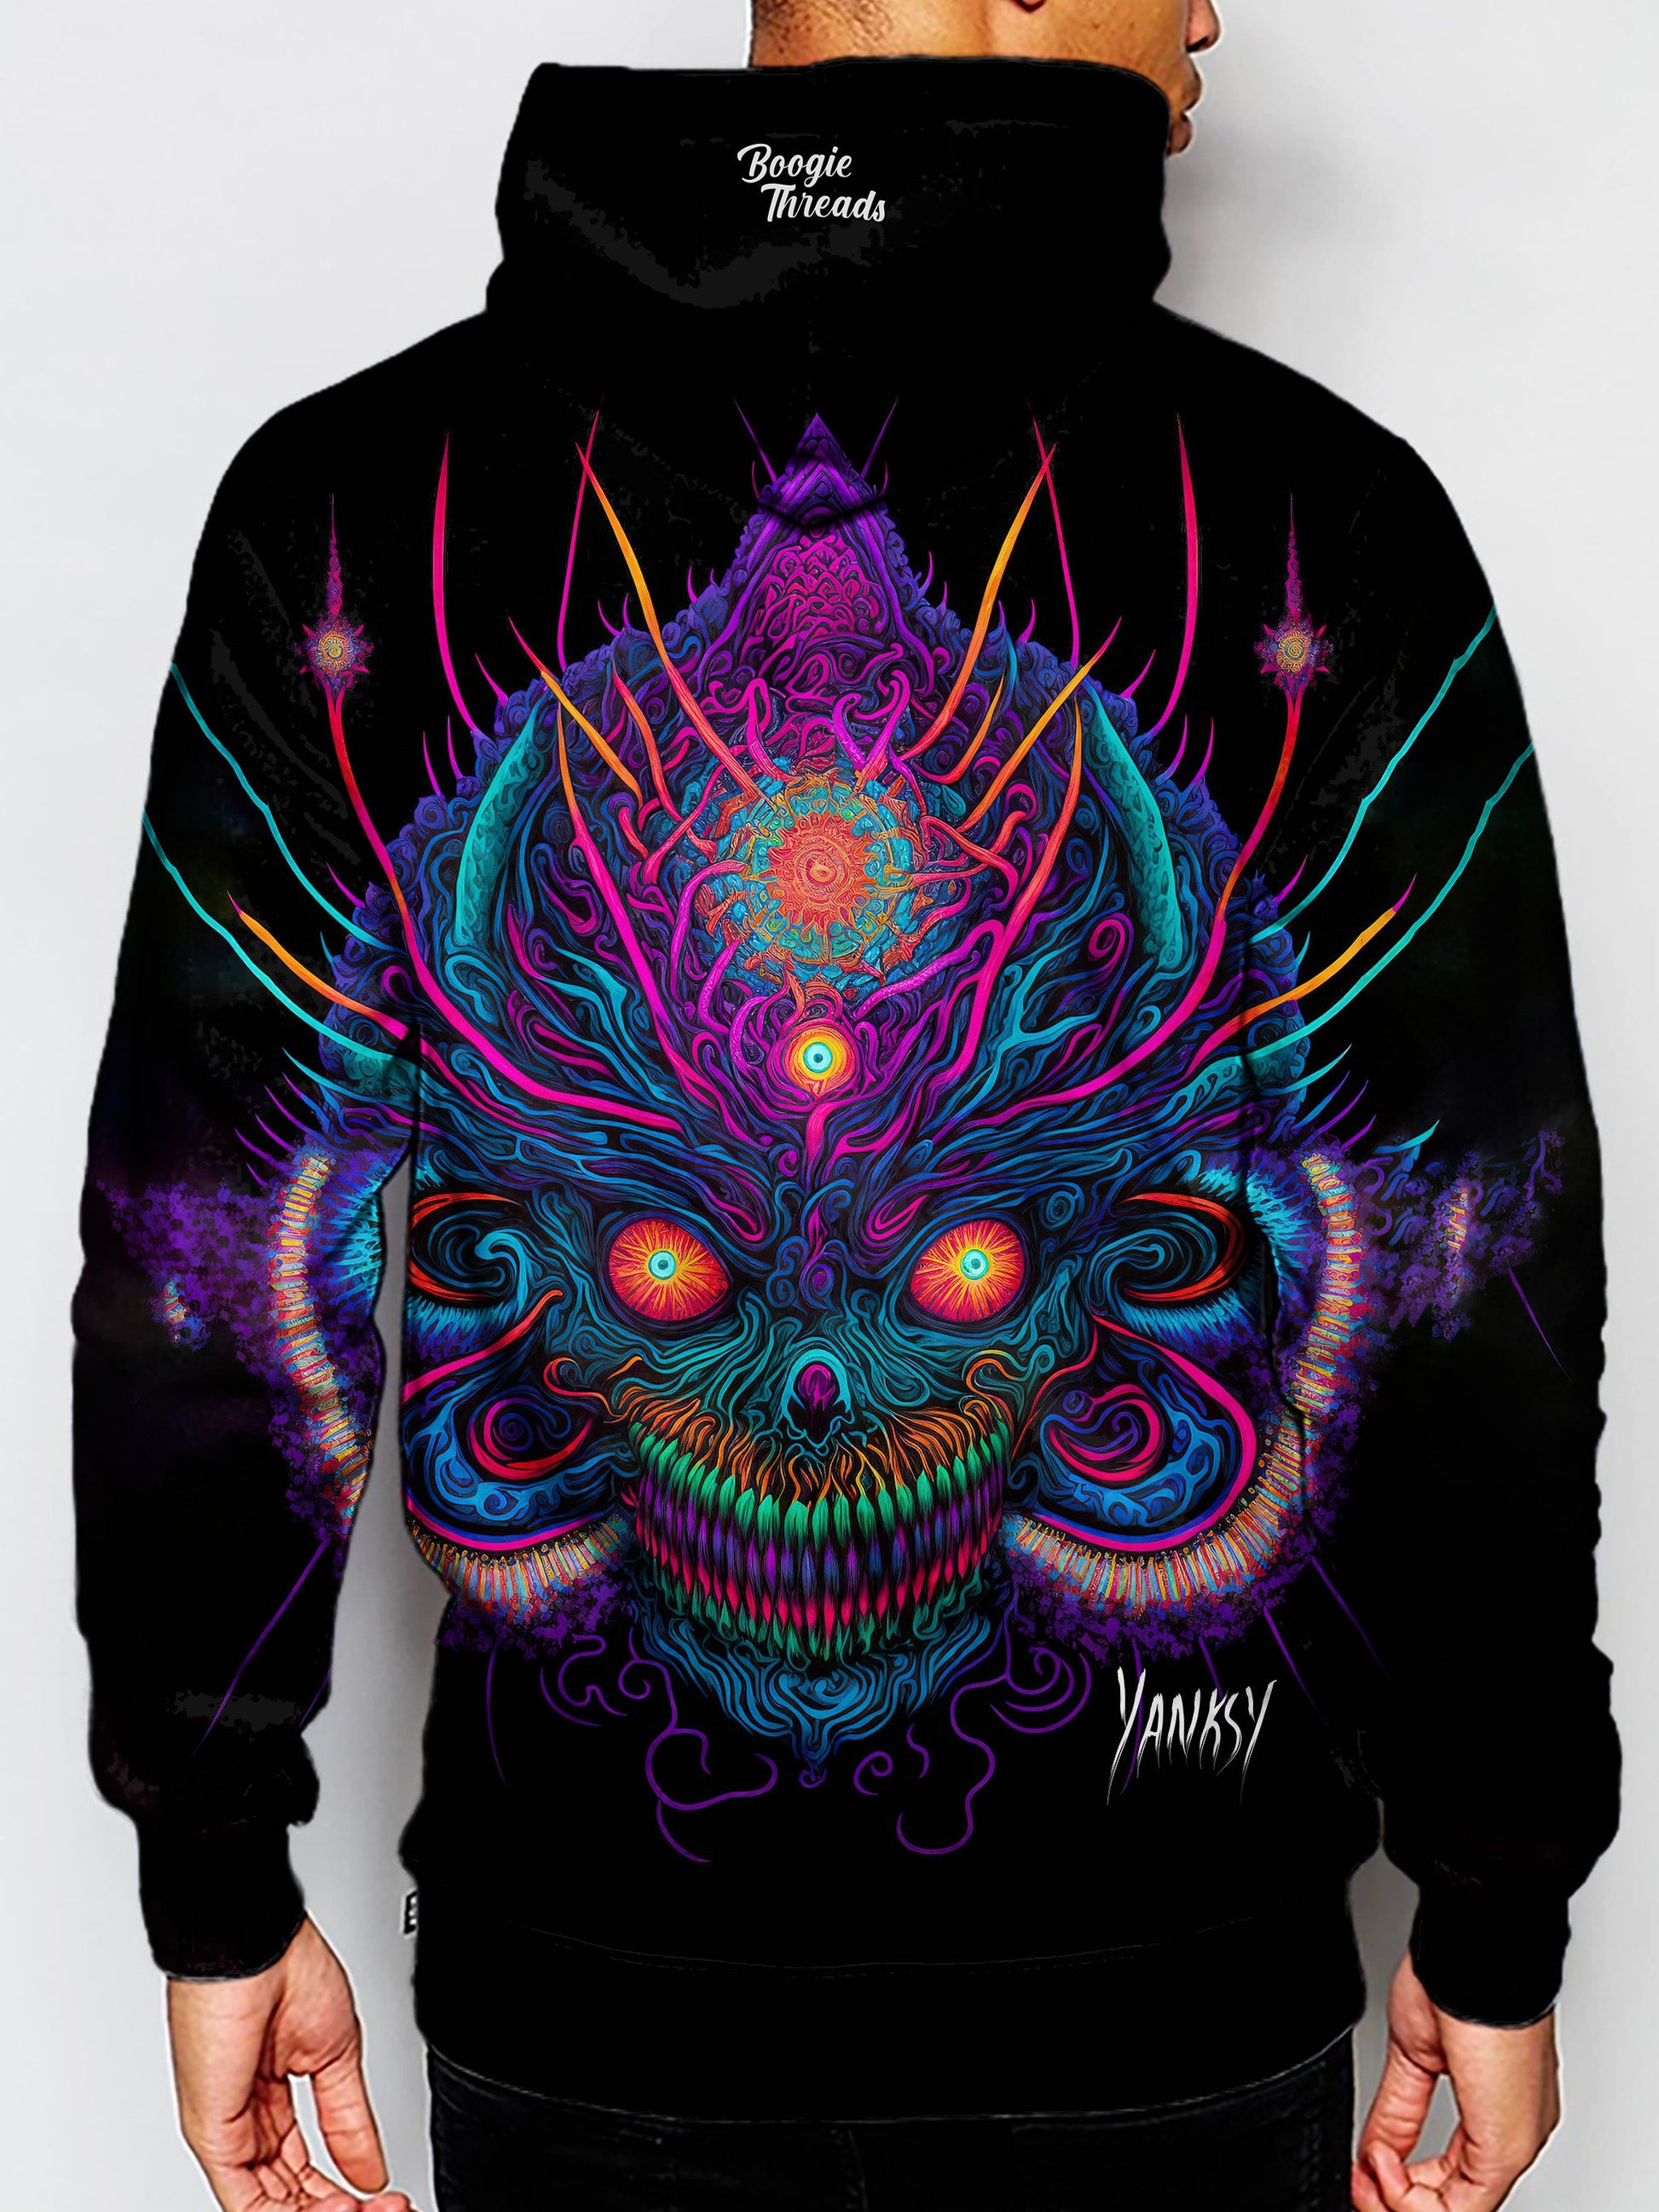 Get lost in the mesmerizing patterns and colors of this psychedelic sublimation pullover hoodie